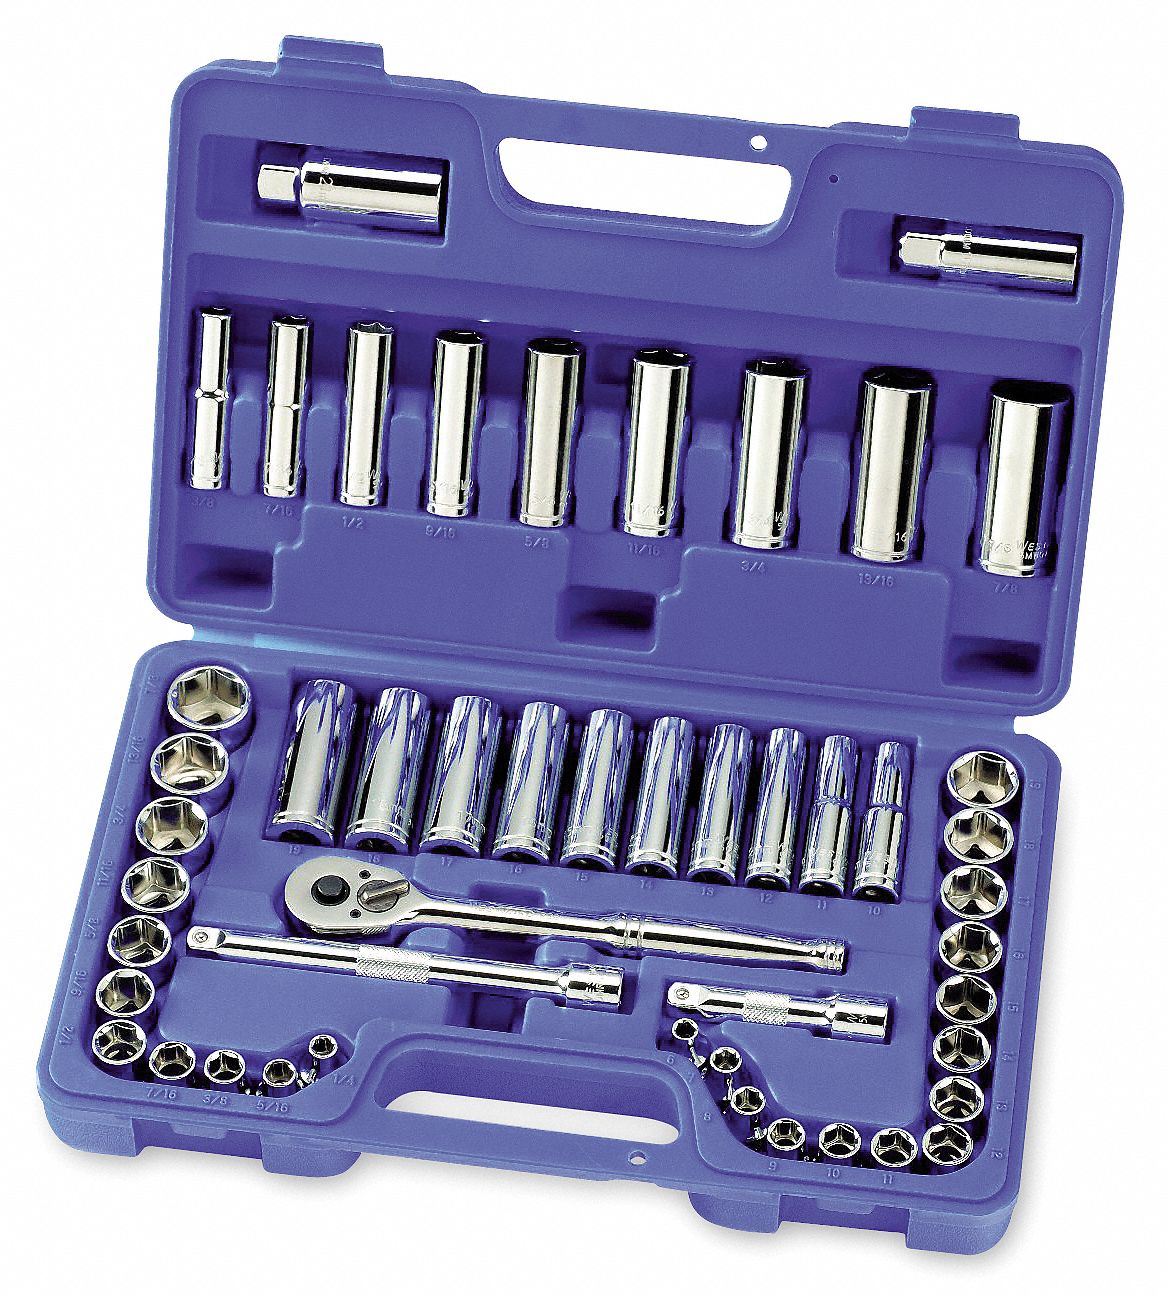 WESTWARD Socket Wrench Set: 3/8 in Drive Size, 49 Pieces, (25) 6-Point,  (19) 6-Point